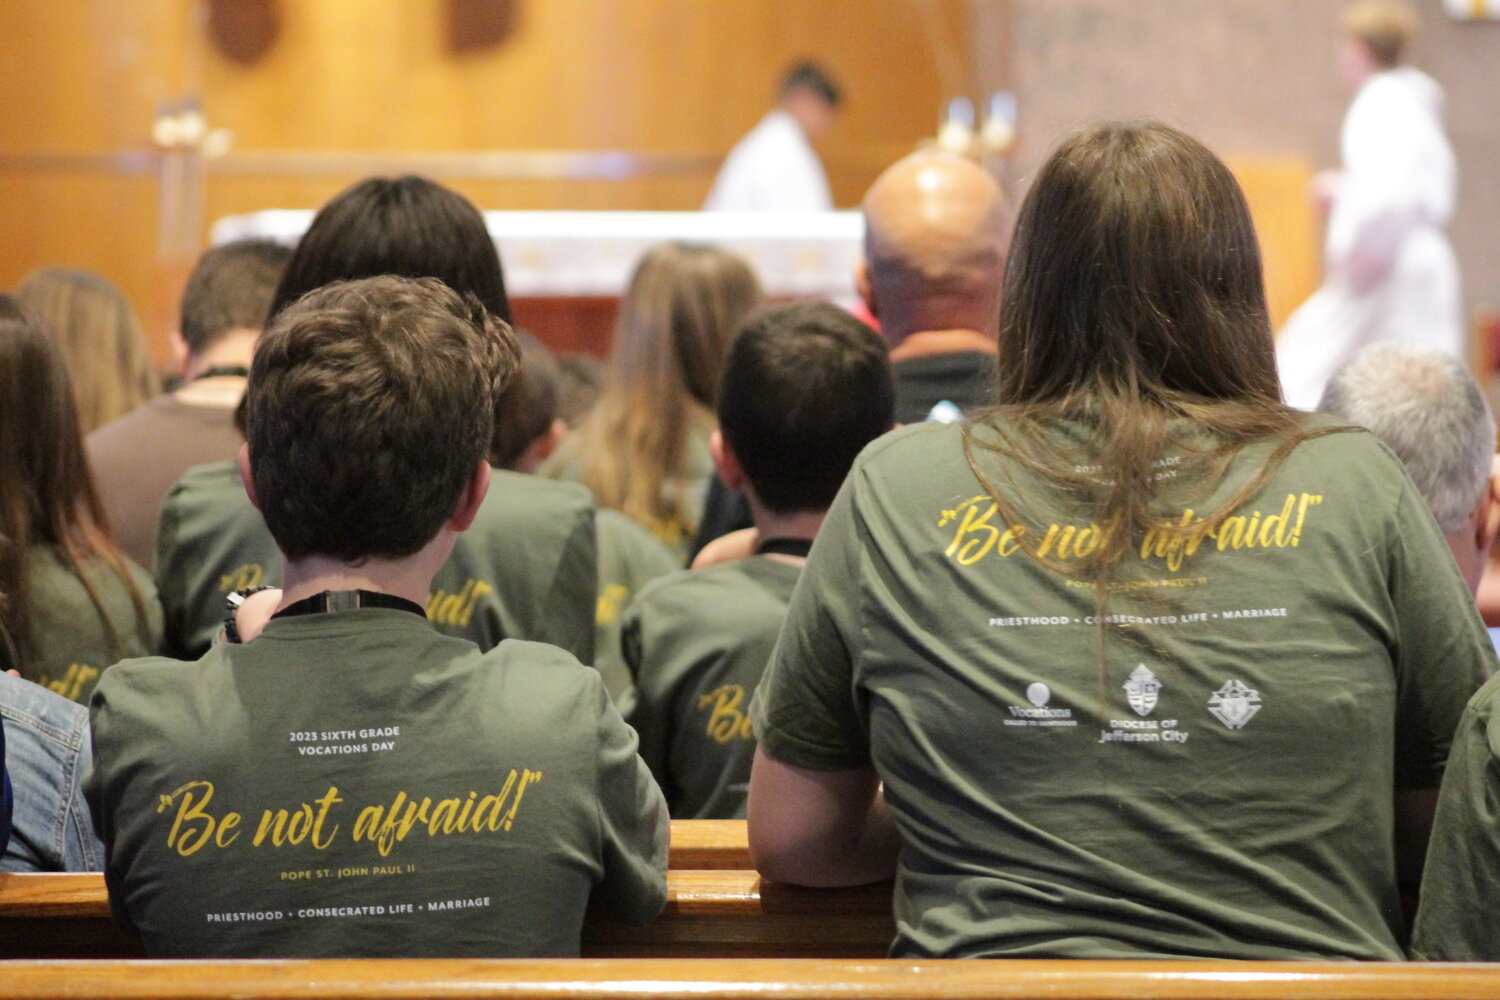 Catholic sixth-graders from throughout the Jefferson City diocese wear their T-shirts proclaiming “Be not afraid!” during Mass at Sixth Grade Vocations Day on May 3 in Our Lady of Lourdes Church and Our Lady of Lourdes Interparish School in Columbia. Participants learned about Marriage, Priesthood and Consecrated Religious Life and every Christian’s call to pursue holiness.